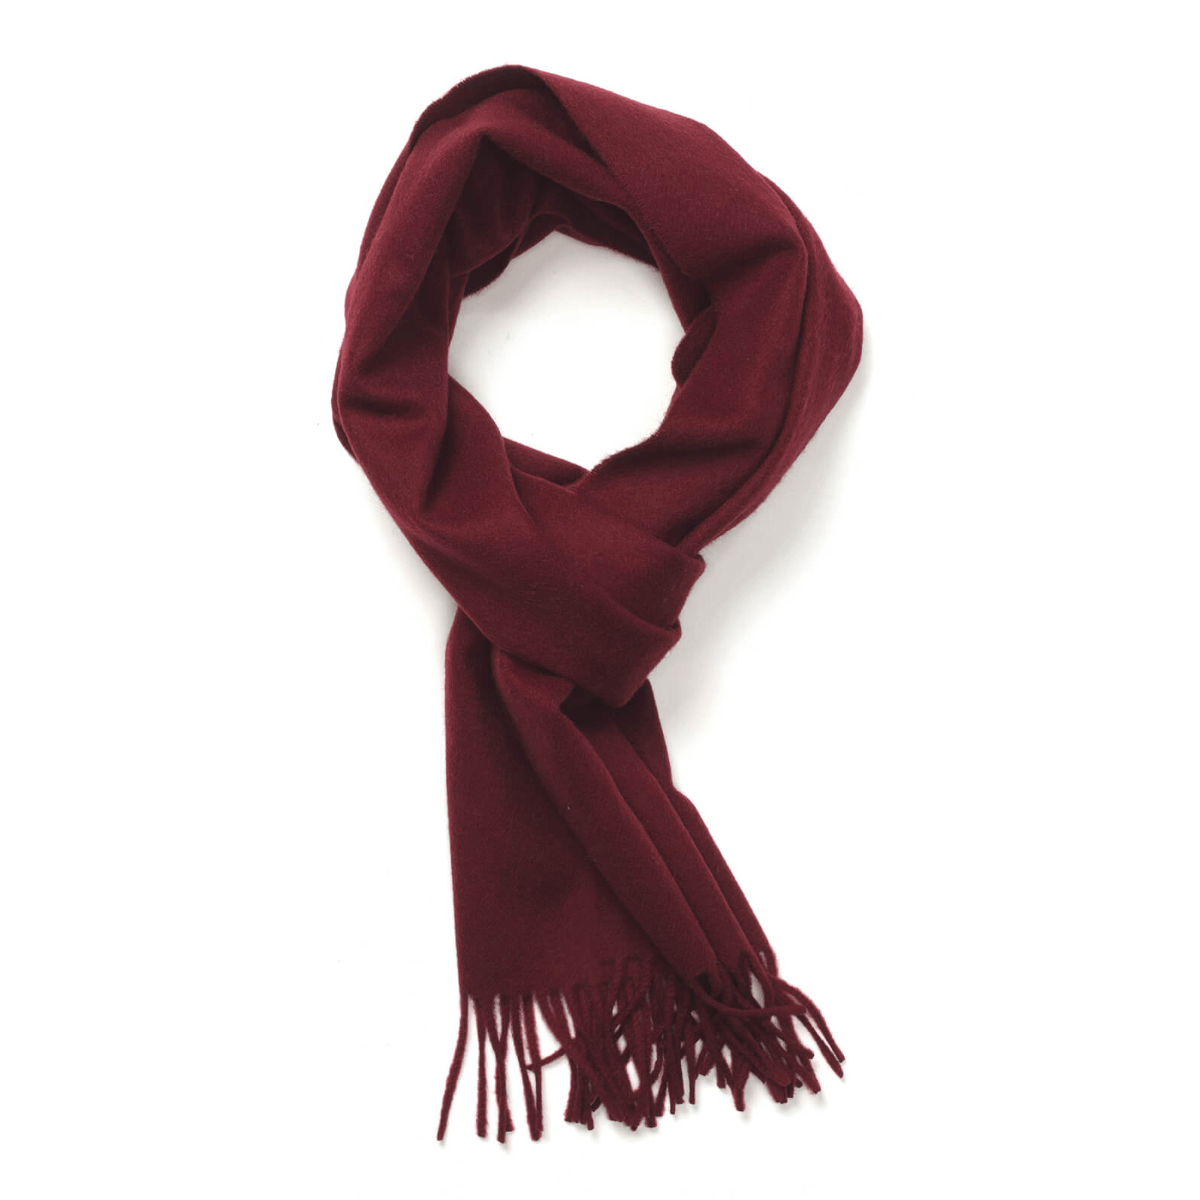 Claret Pure Cashmere Scarf  Robert Old   